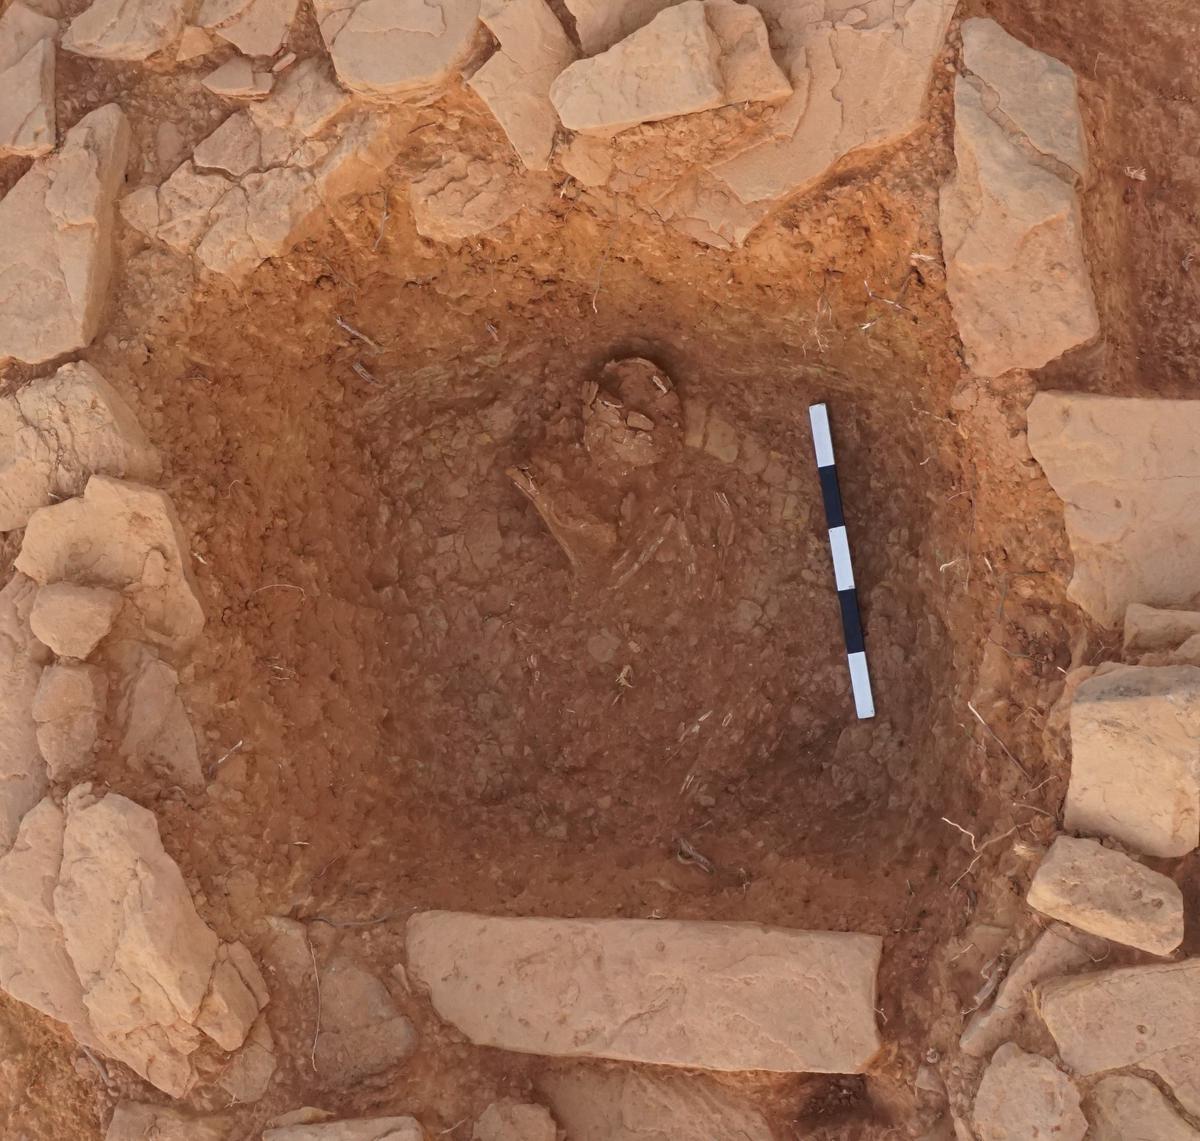 A human remain unearthed at the excavation site in Padta Bet